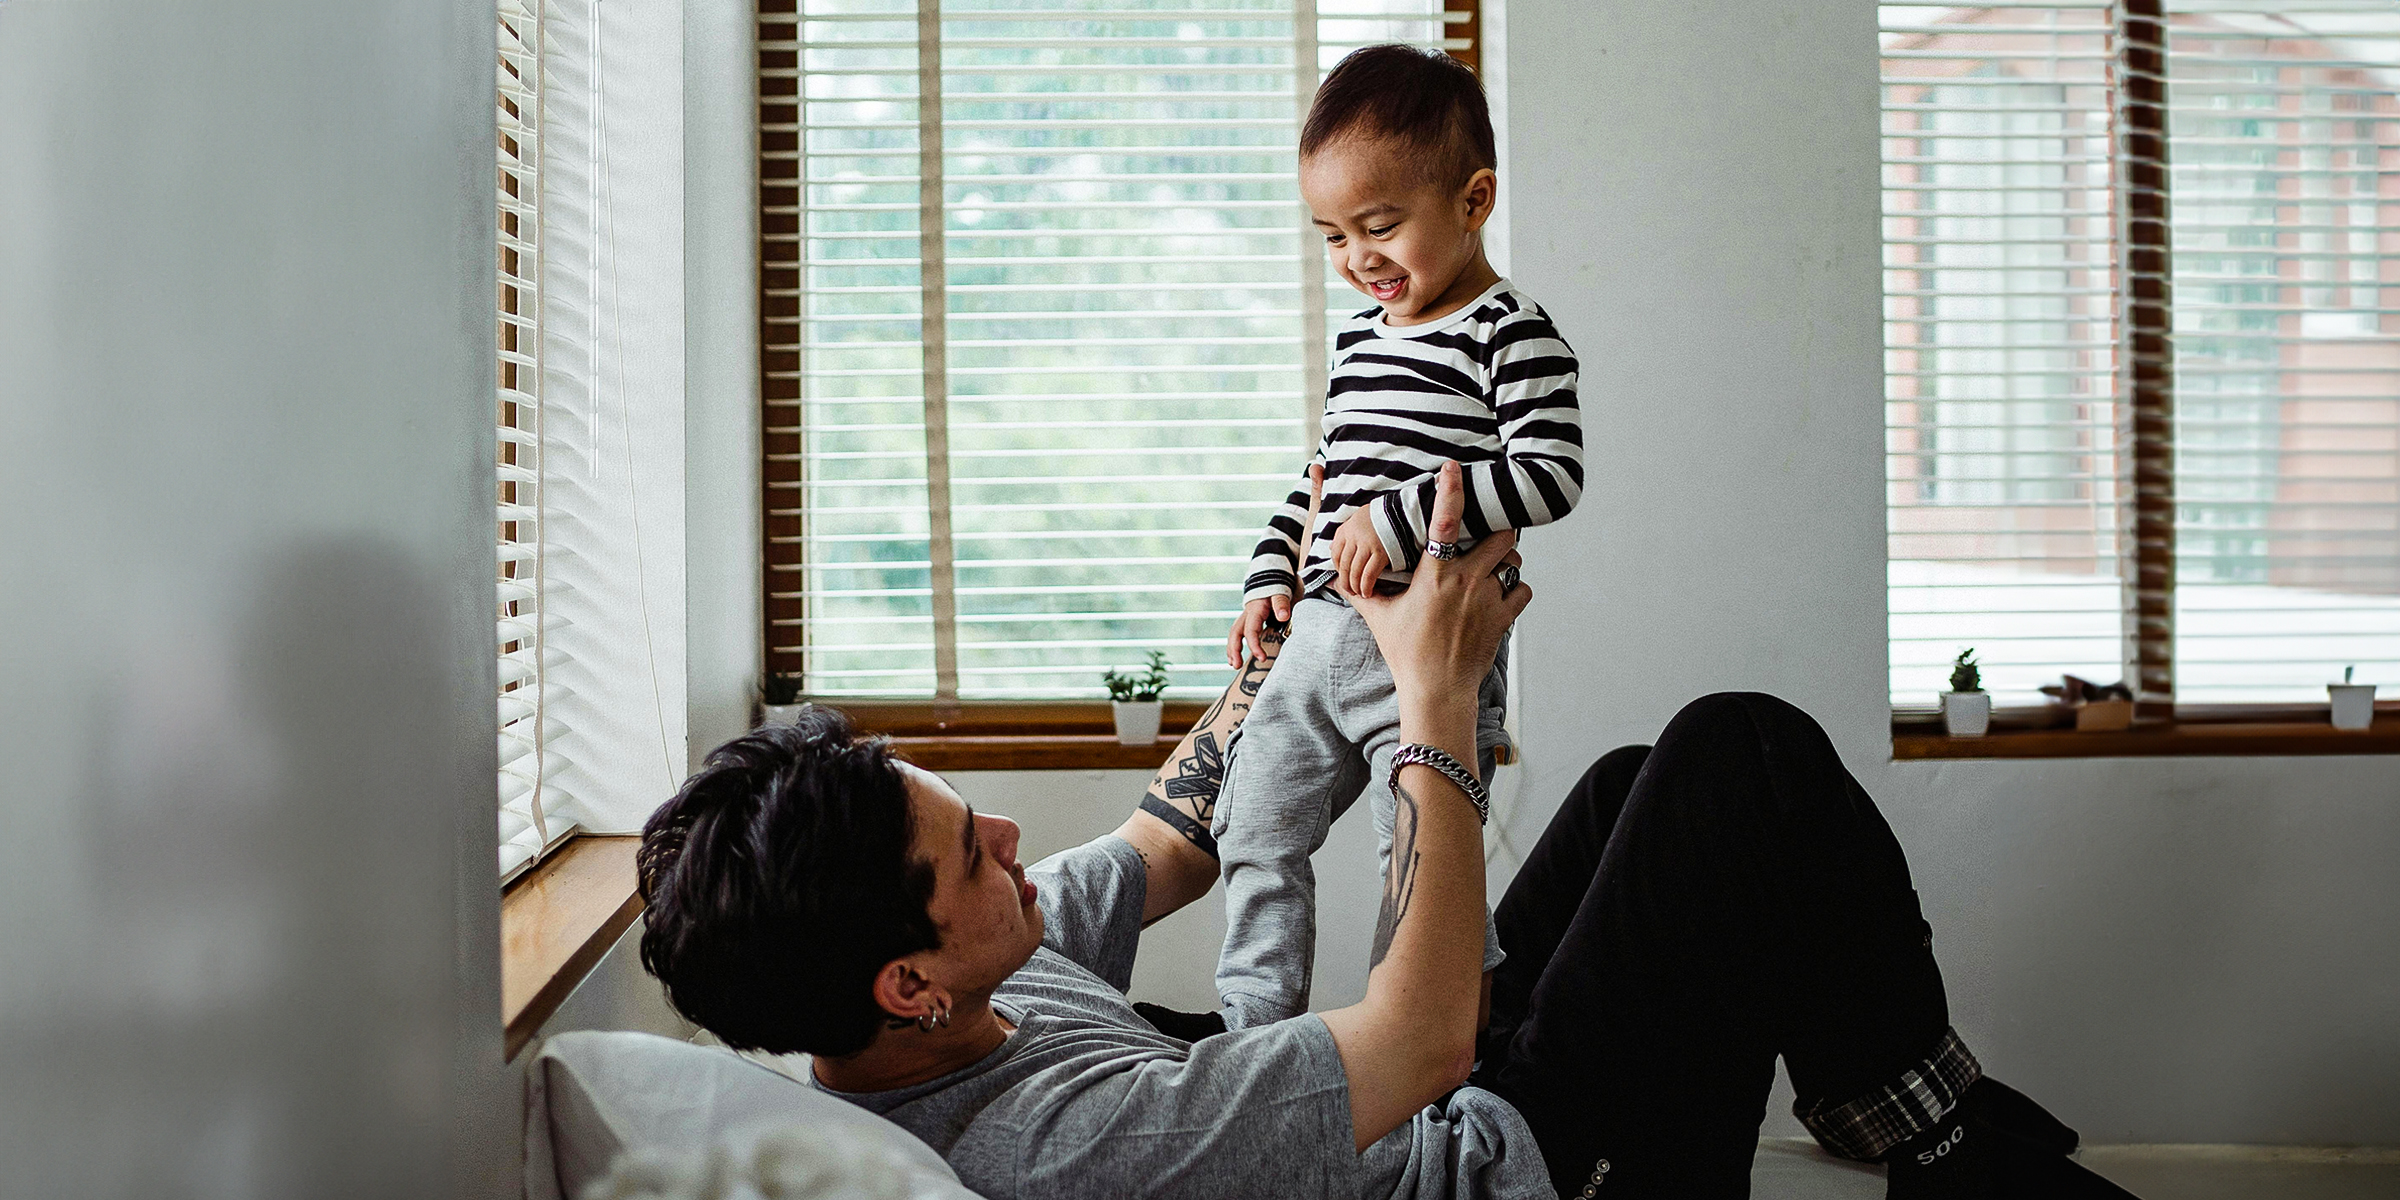 A father with his son | Source: Pexels